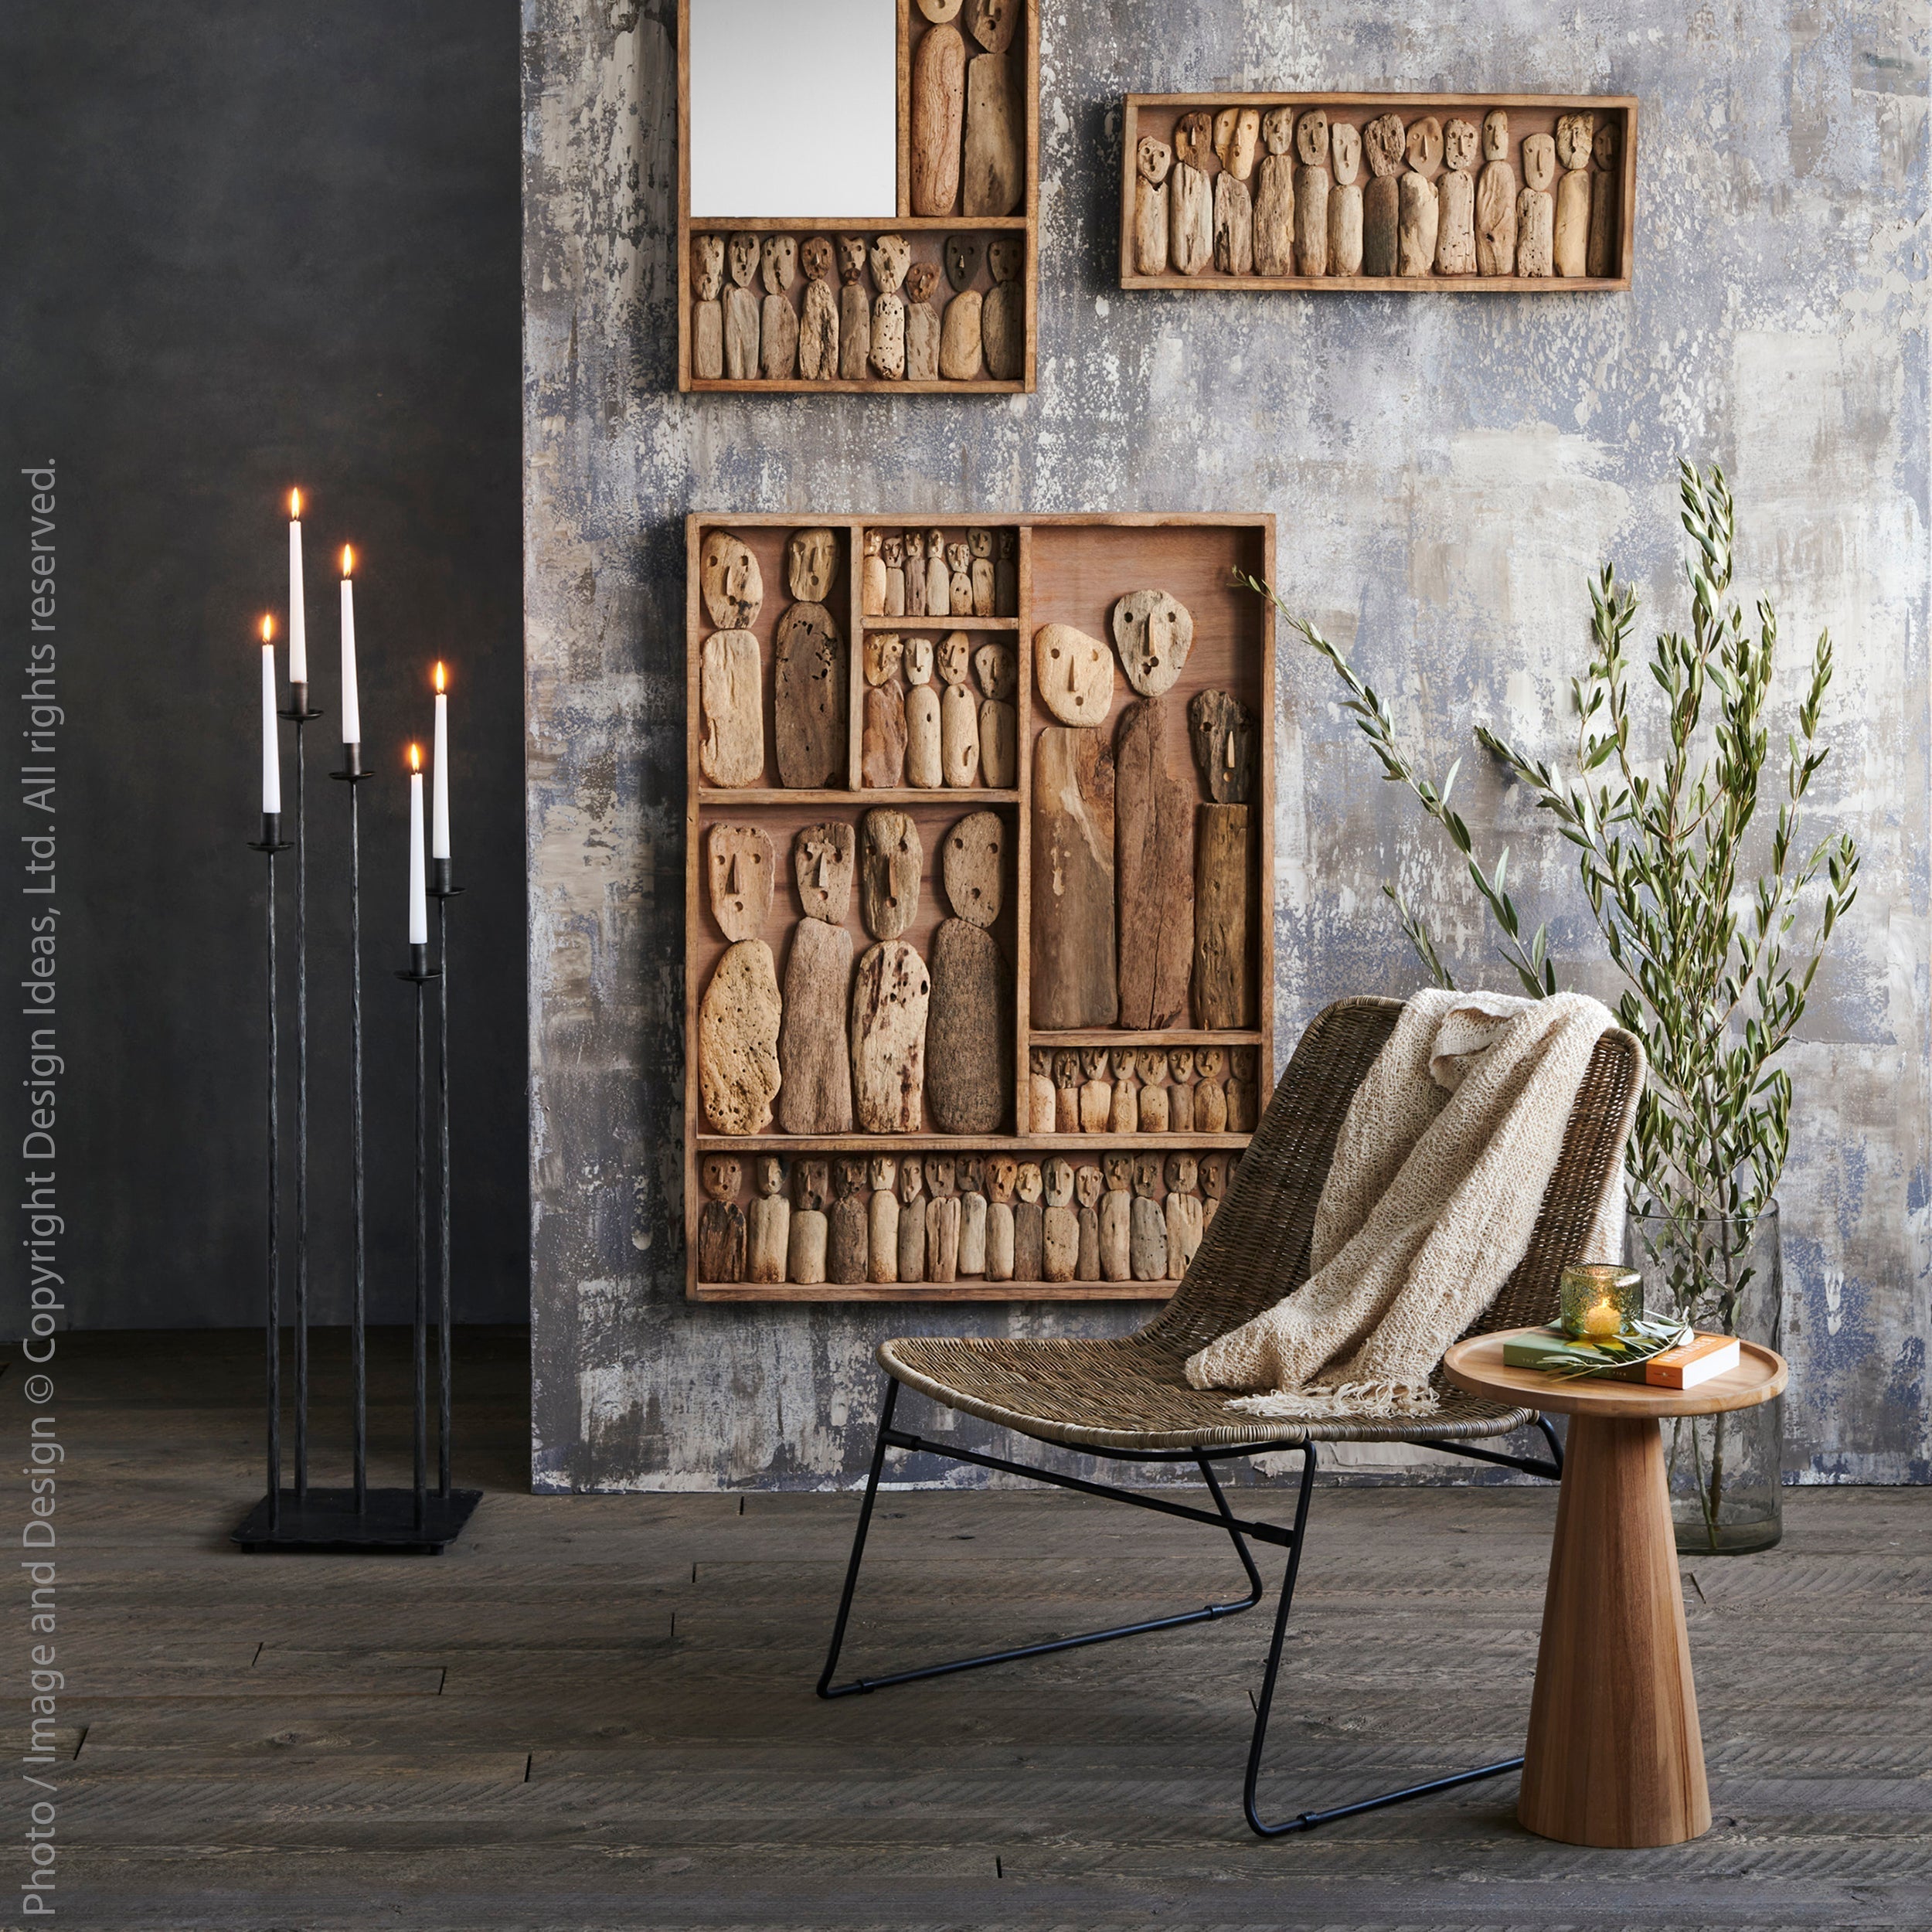 Tavu™ shadow box (30 x 40 x 3in) - Natural | Image 2 | Premium Decorative from the Tavu collection | made with Recycled wood for long lasting use | sustainably sourced with recycled materials | texxture